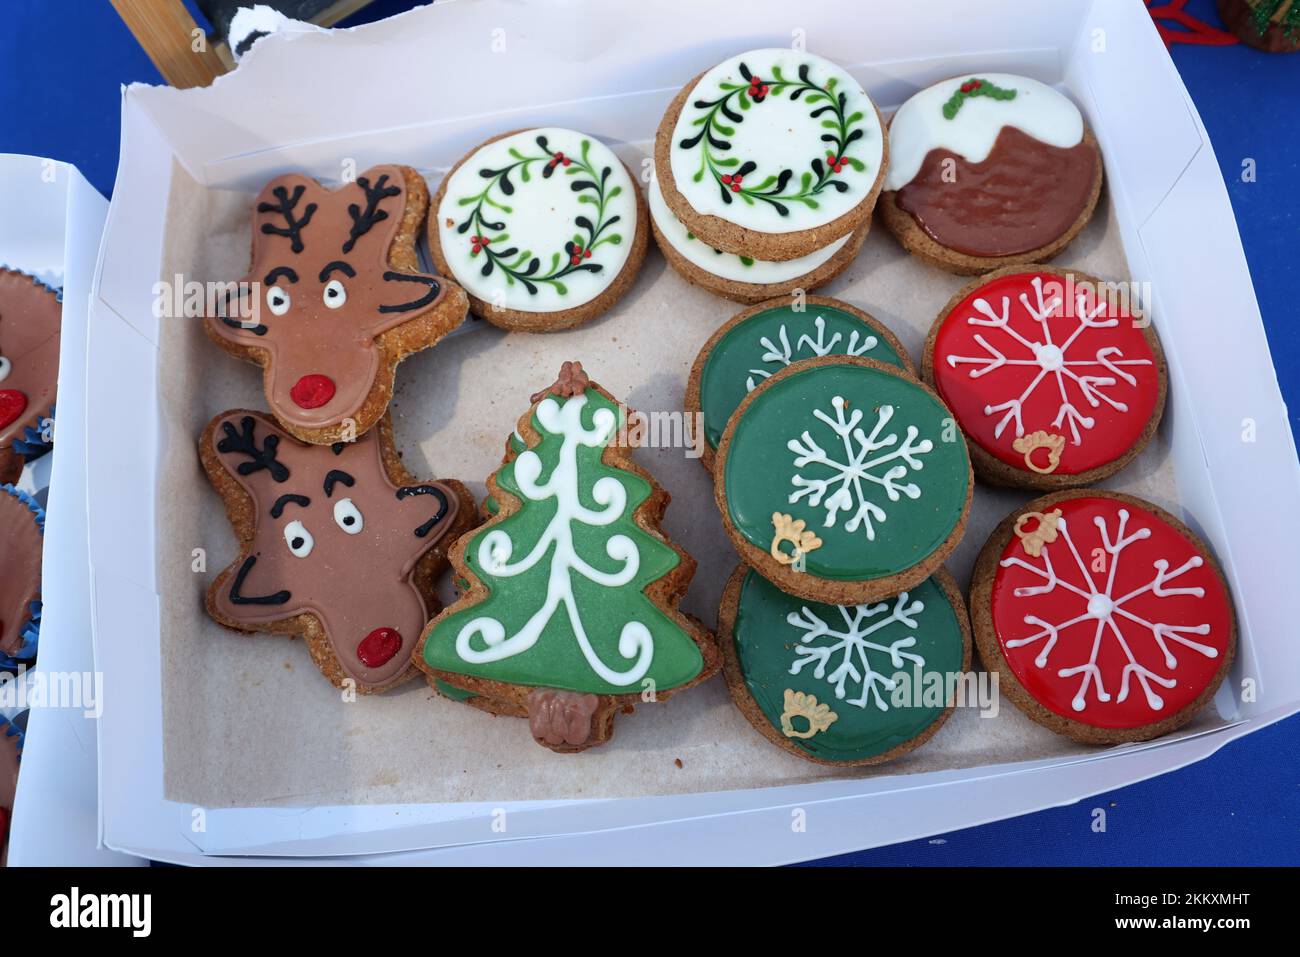 Special Christmas dog treats pictured on a market stall in Lee-on-Solent, Hampshire, UK. Stock Photo